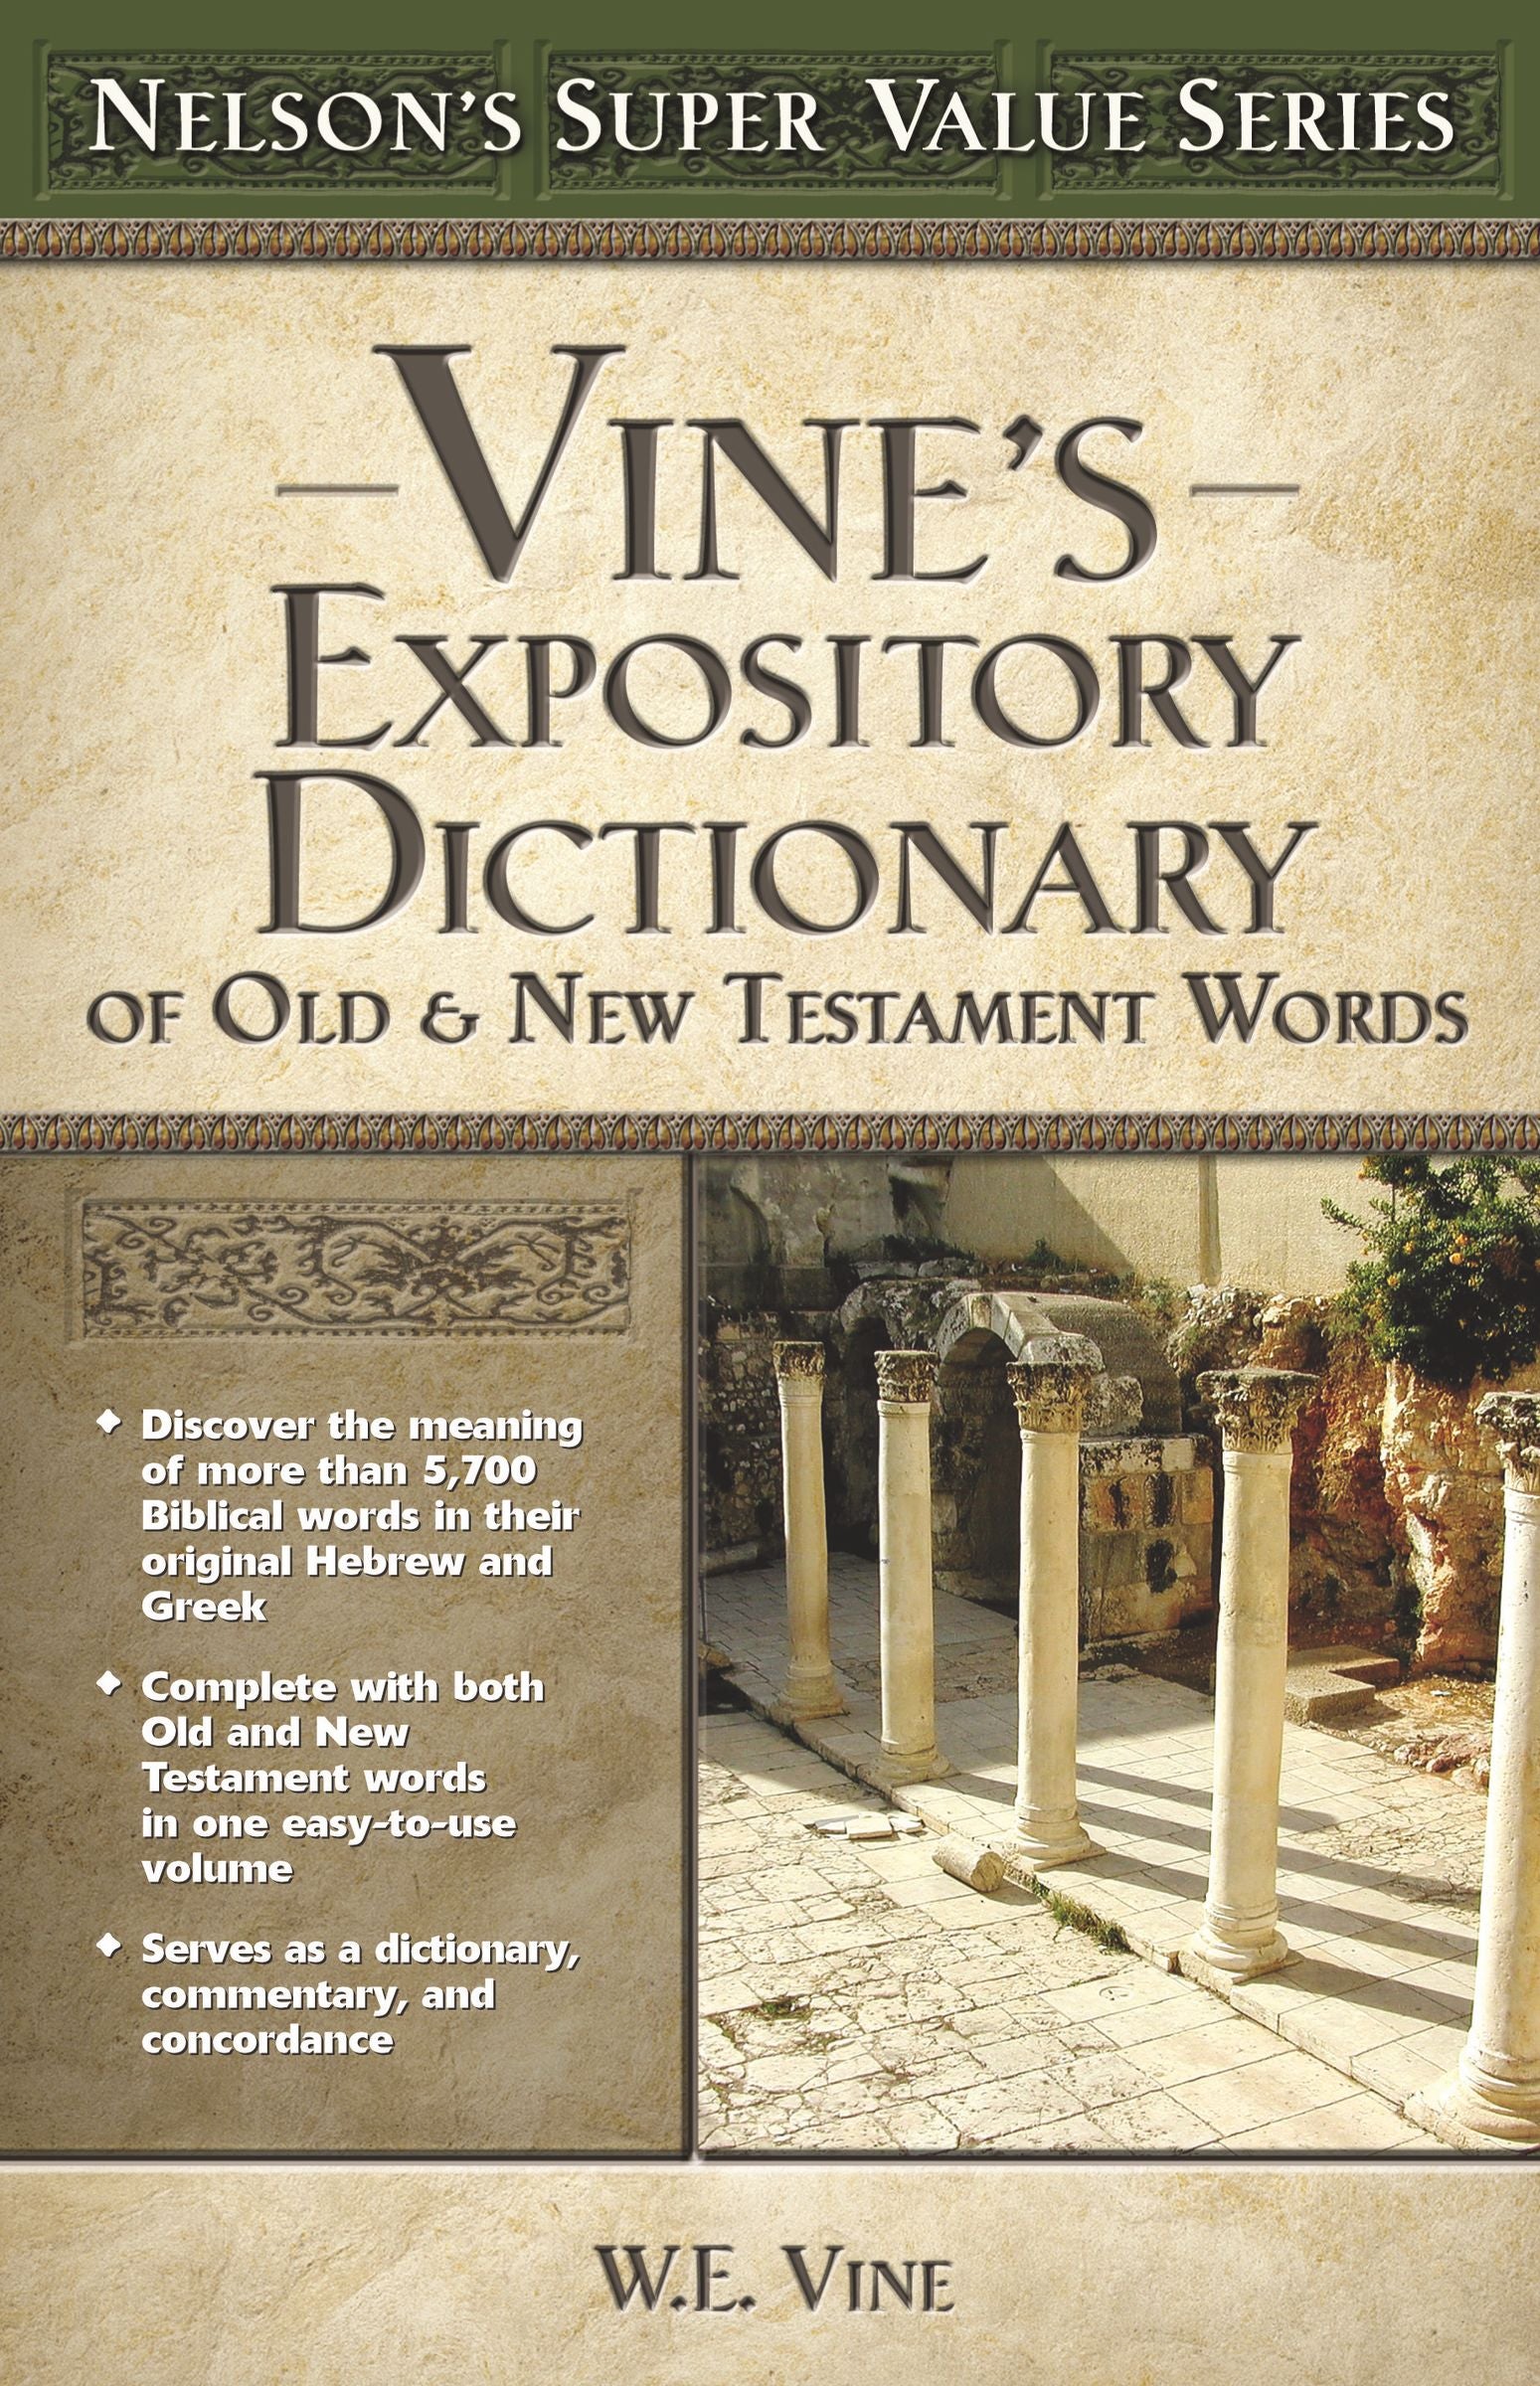 Image of Vine's Expository Dictionary of the Old and New Testament Words other